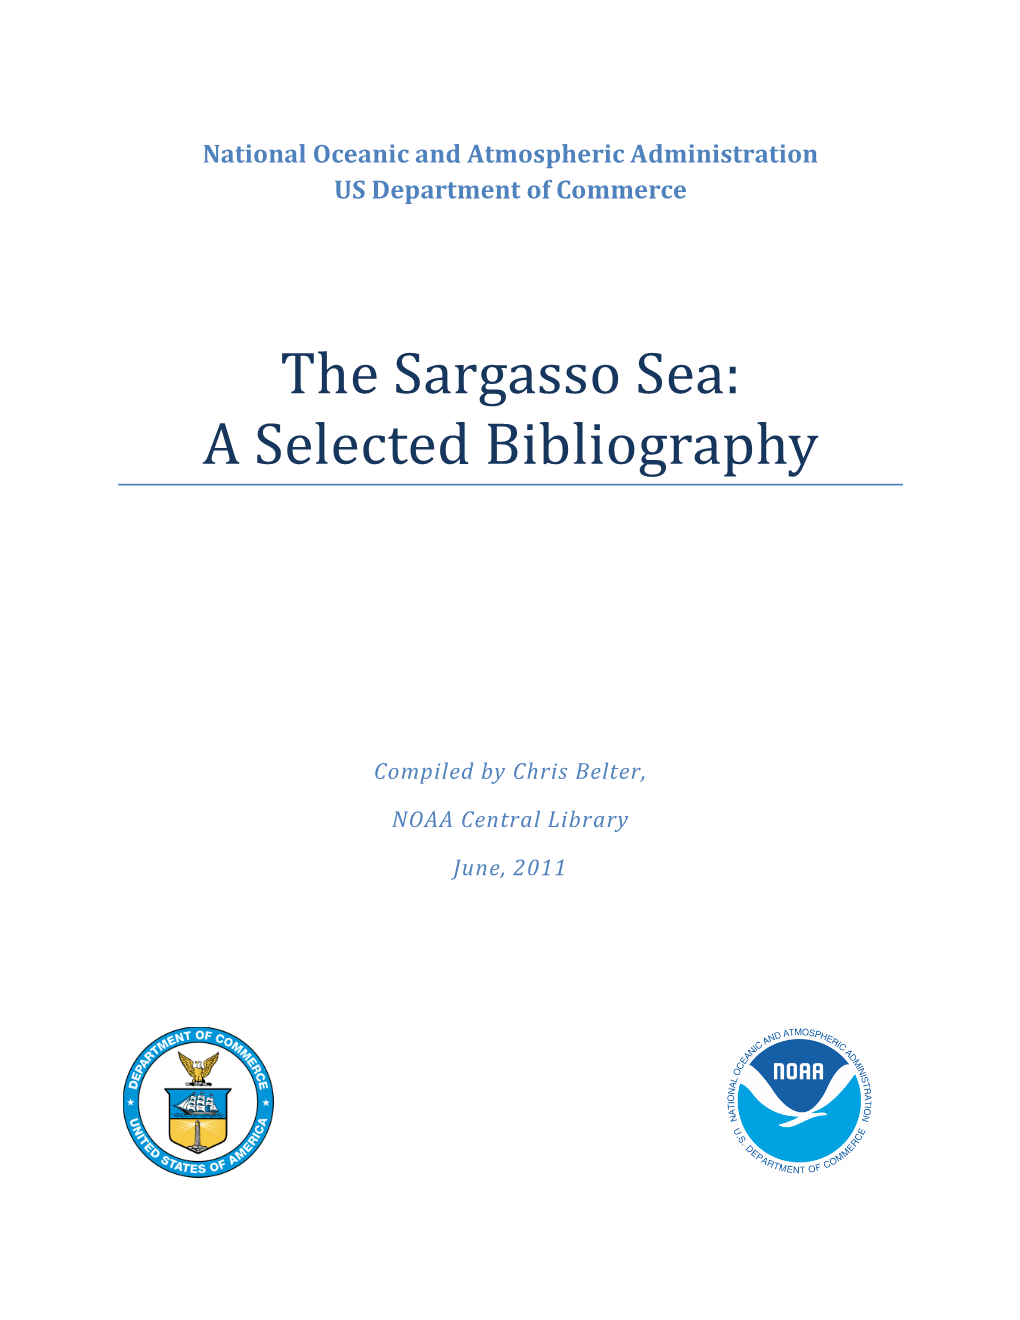 The Sargasso Sea: a Selected Bibliography